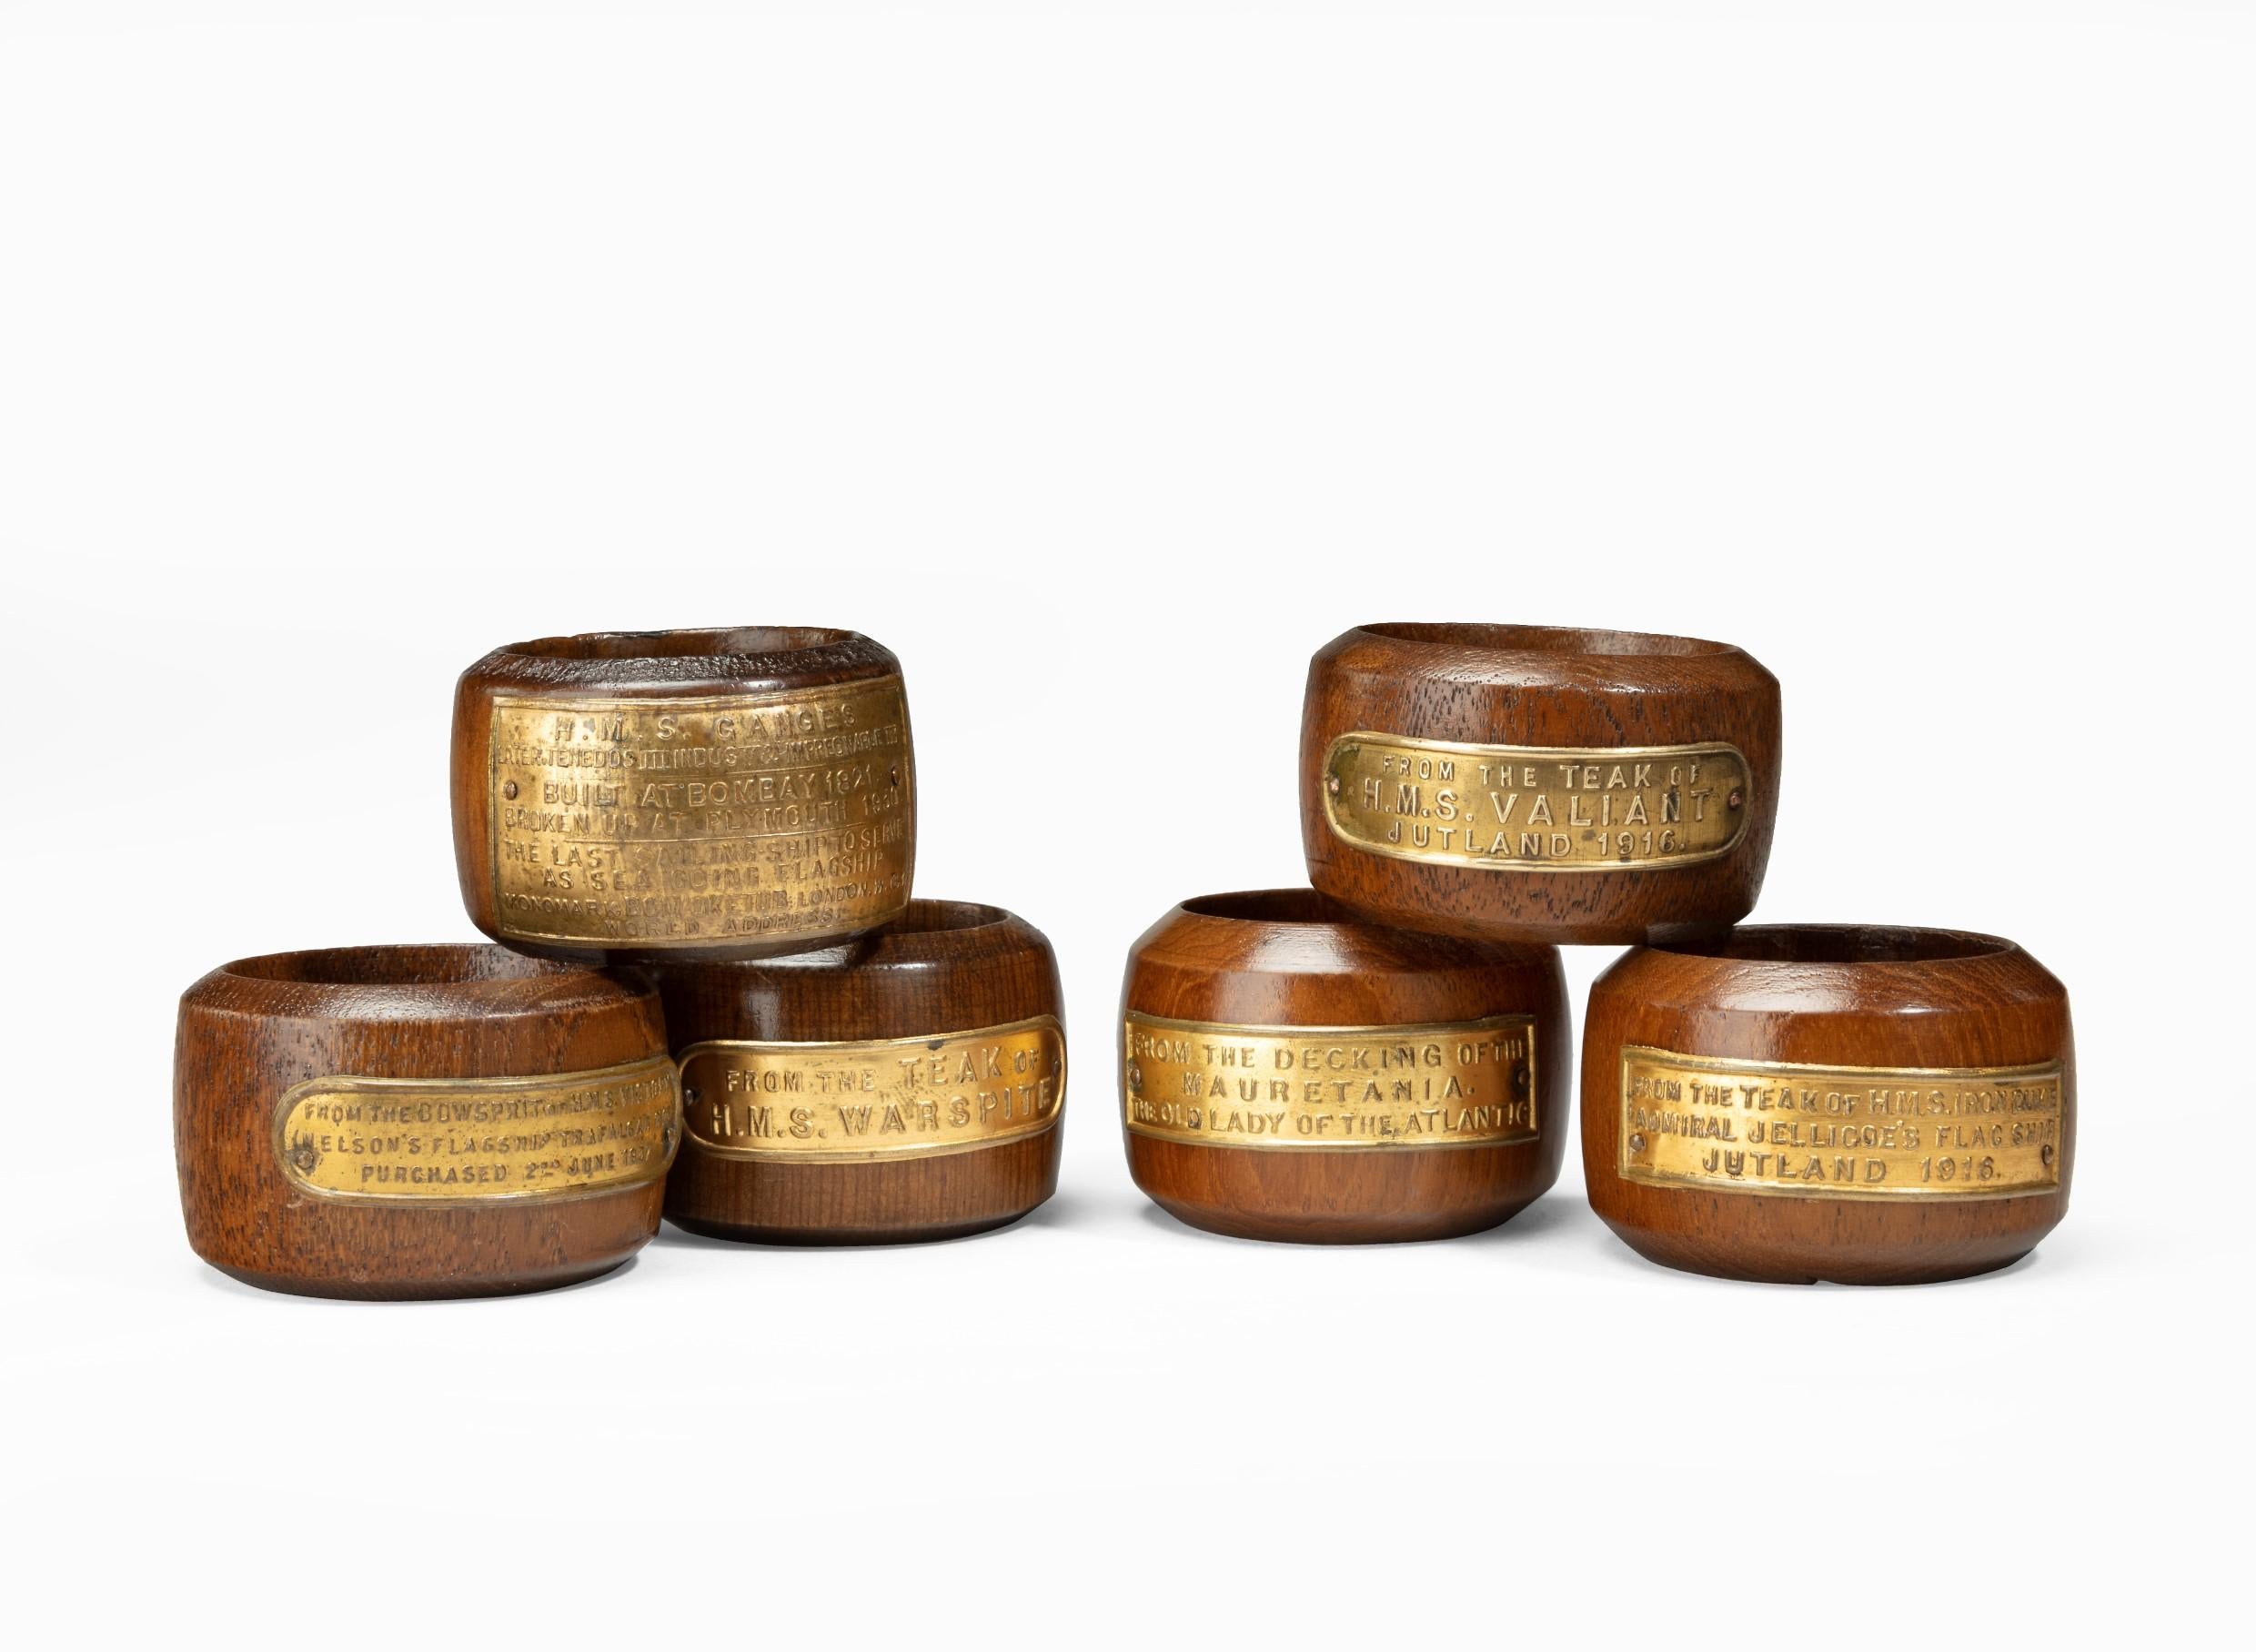 These six napkin rings are made from the timbers Victory, Ganges, Iron Duke, Valiant, Warspite and Mauritania. Each is turned and applied with a brass label stating variously: ‘From the Bowsprit of HMS Victory (Nelson’s Flagship Trafalgar 1805)